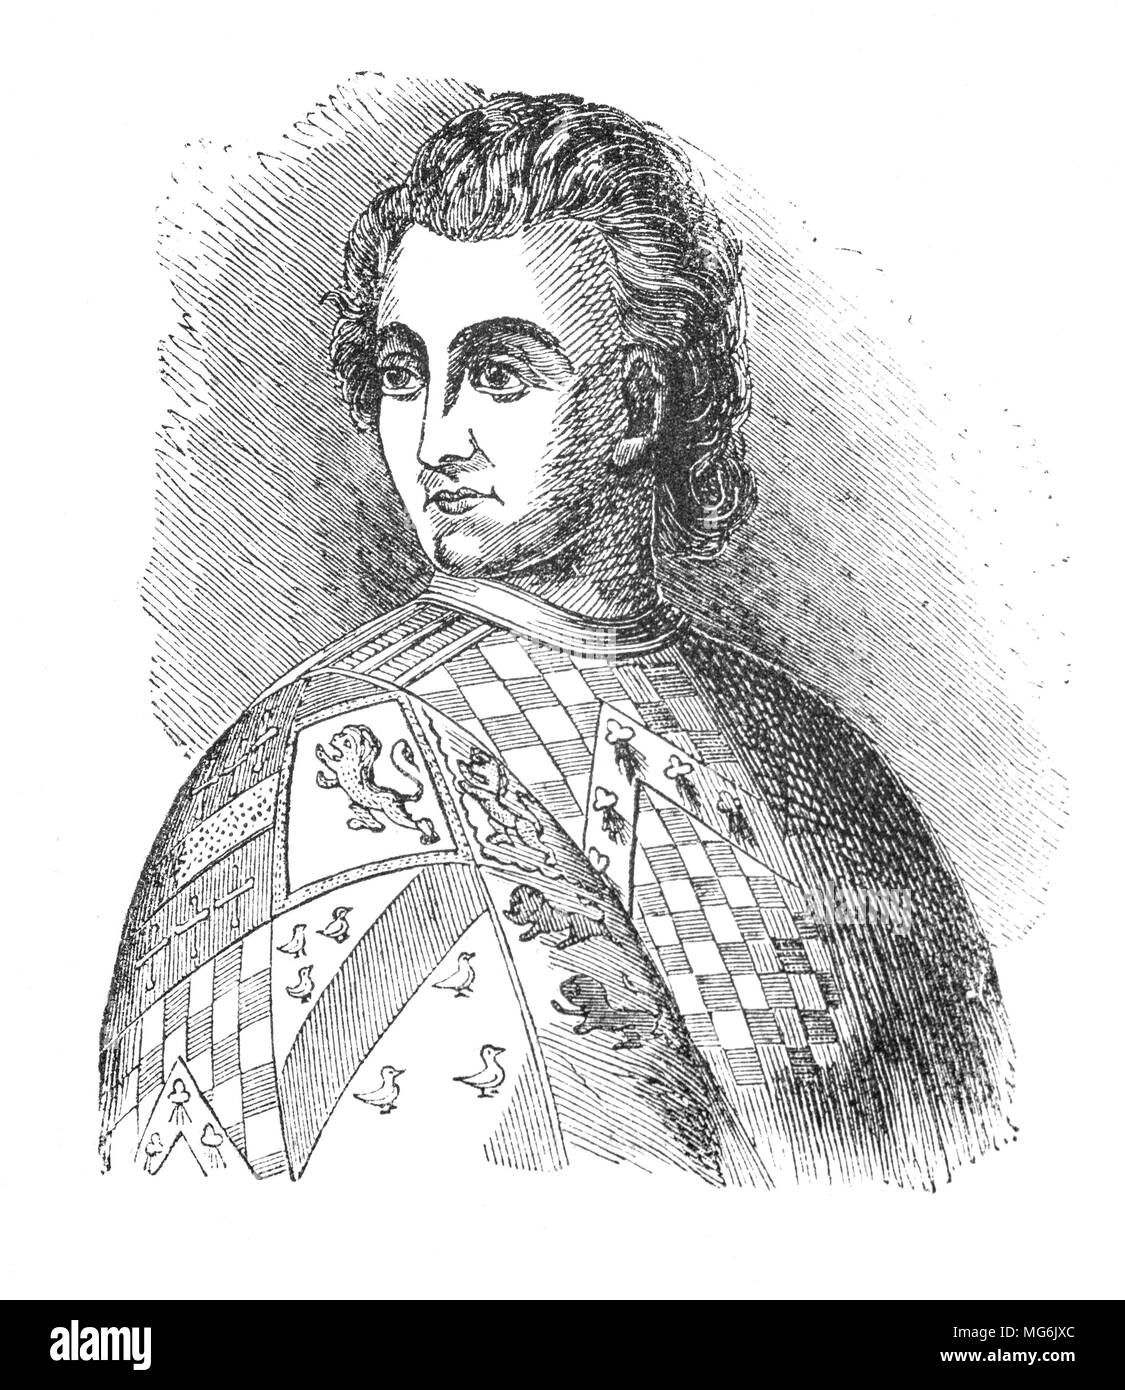 A portrait of John Talbot, 1st Earl of Shrewsbury and 1st Earl of Waterford KG (1384/1387 – 17 July 1453), a noted English military commander during the Hundred Years' War, as well as the only Constable of France appointed by the king of England.  Talbot was a daring soldier, who reorganized the army with captains and lieutenants, trained the men for sieges, and equipped them accordingly and his trademark tactic was rapid aggressive attacks. In 1436, he led a small force  and routed the French at the battle of Ry near Rouen. Stock Photo